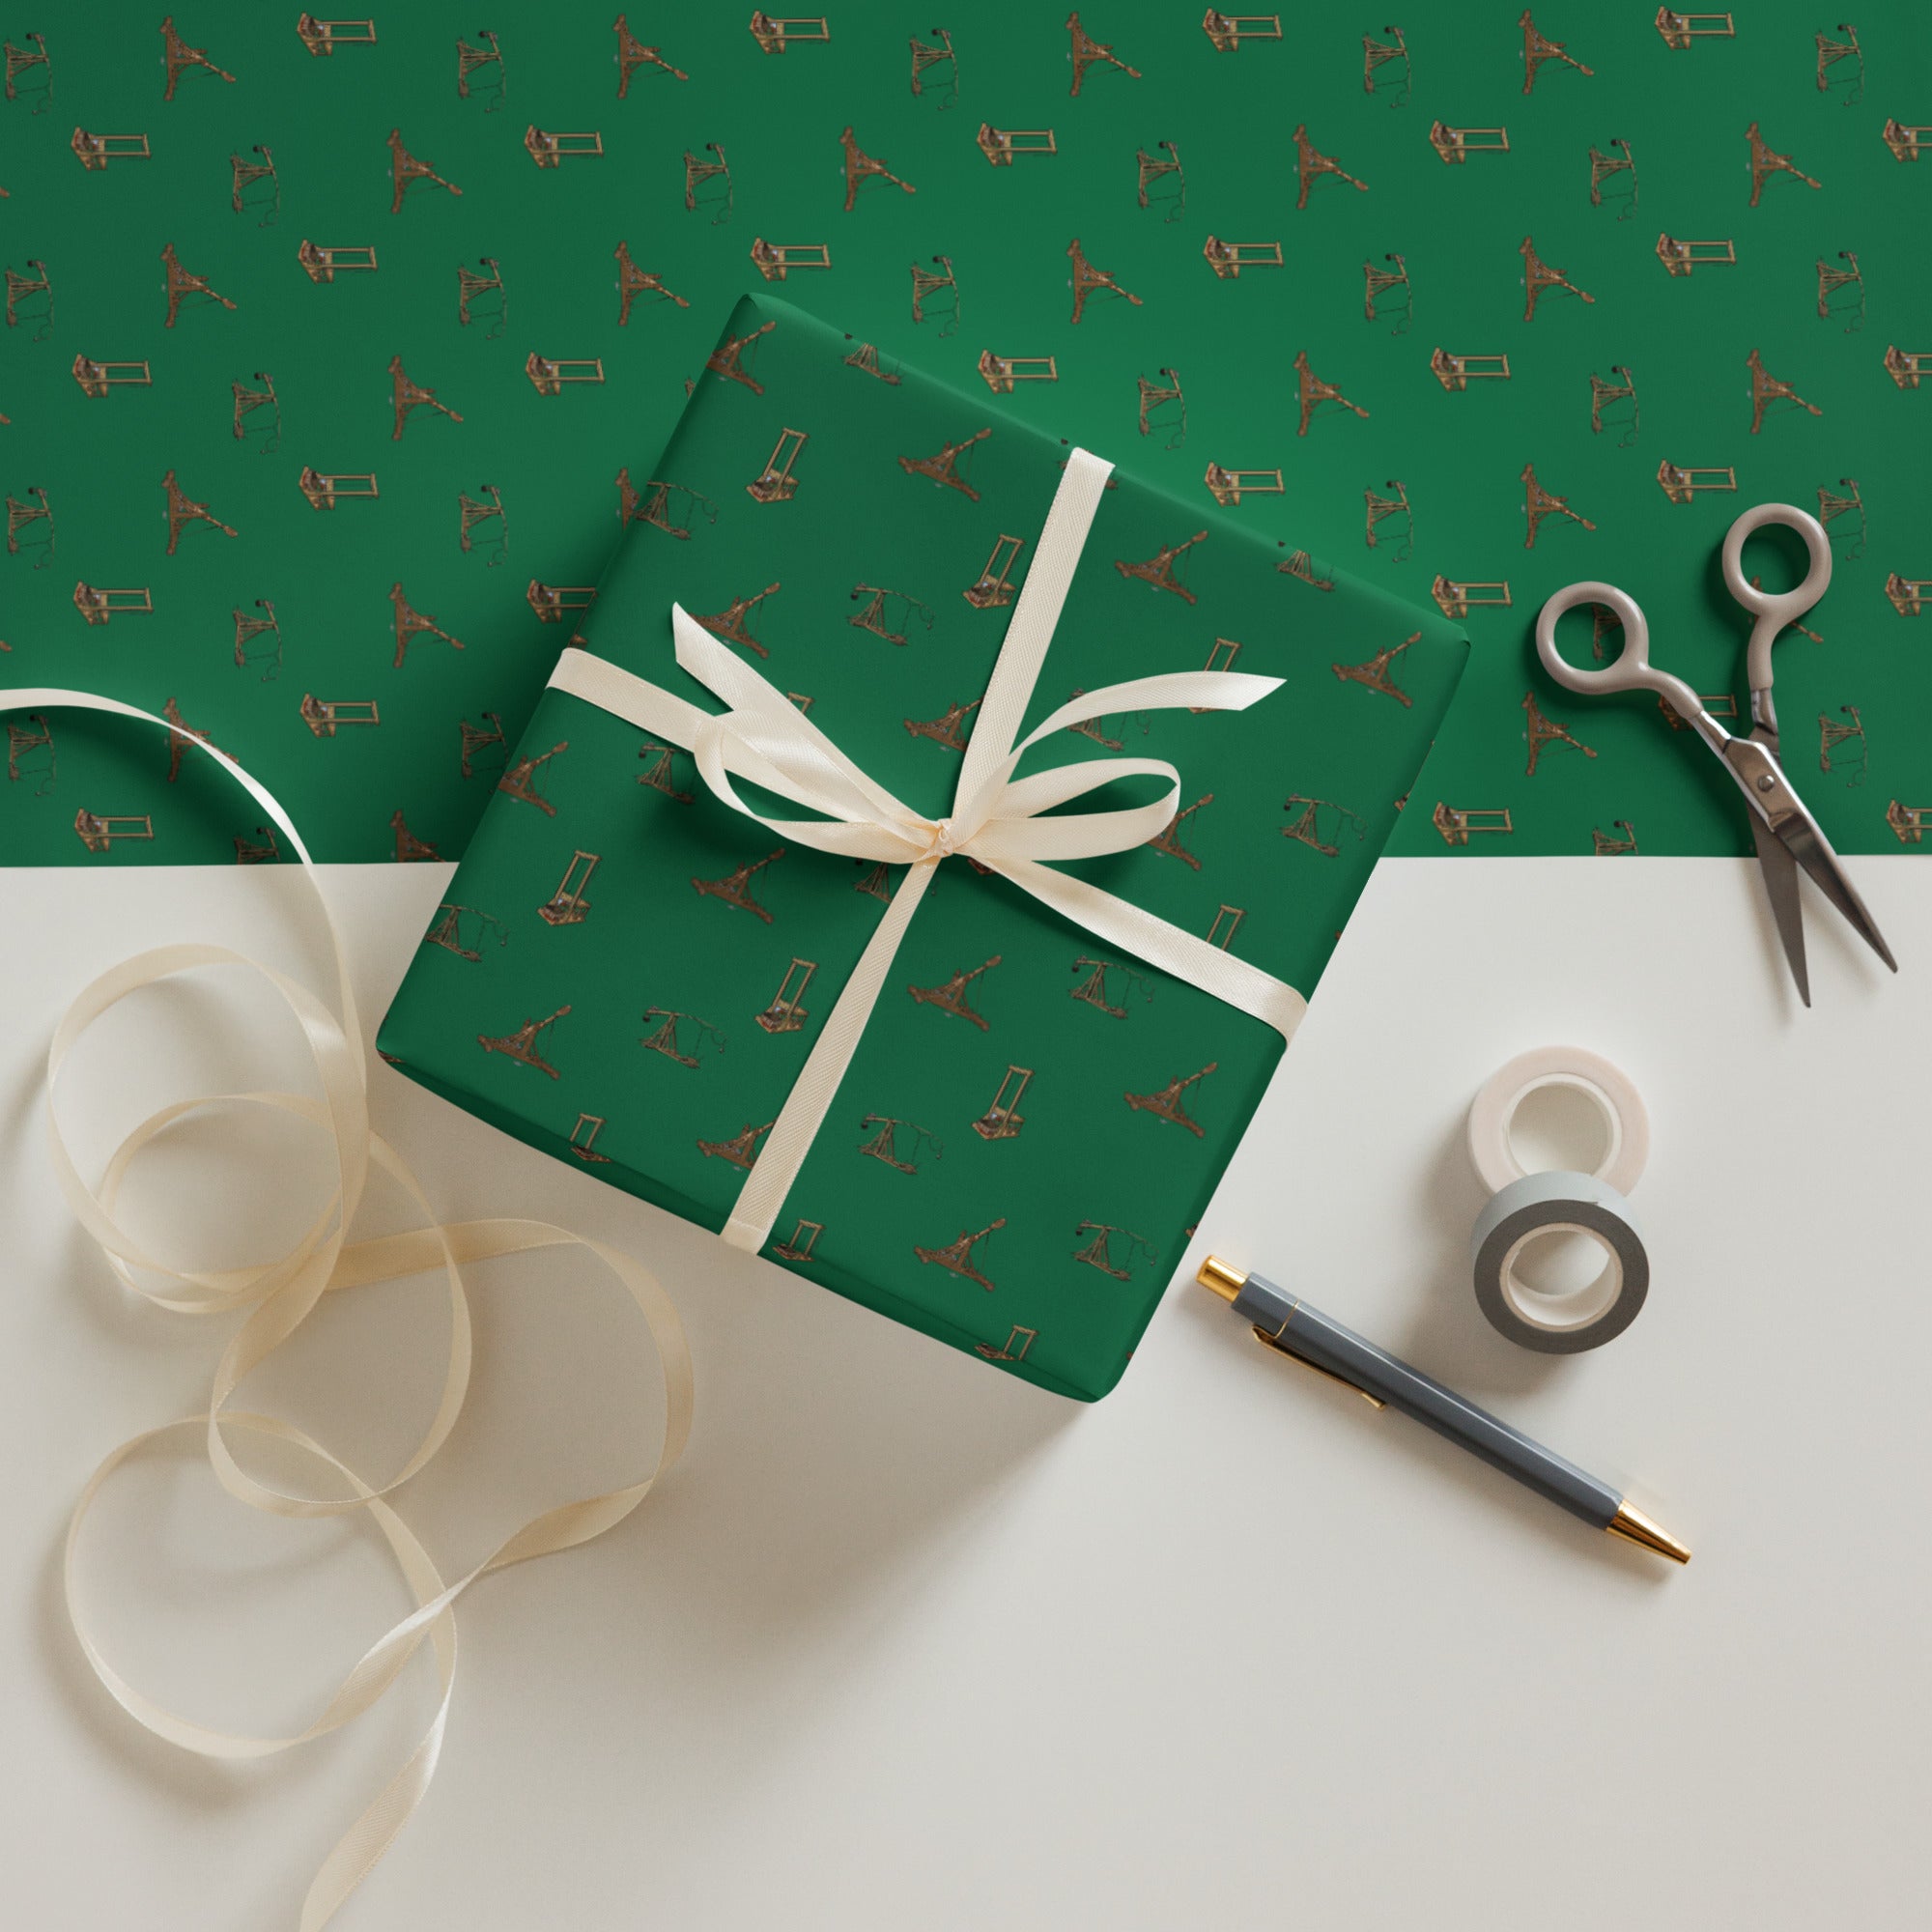 Catapults Trebuchets and Guillotines Wrapping Paper